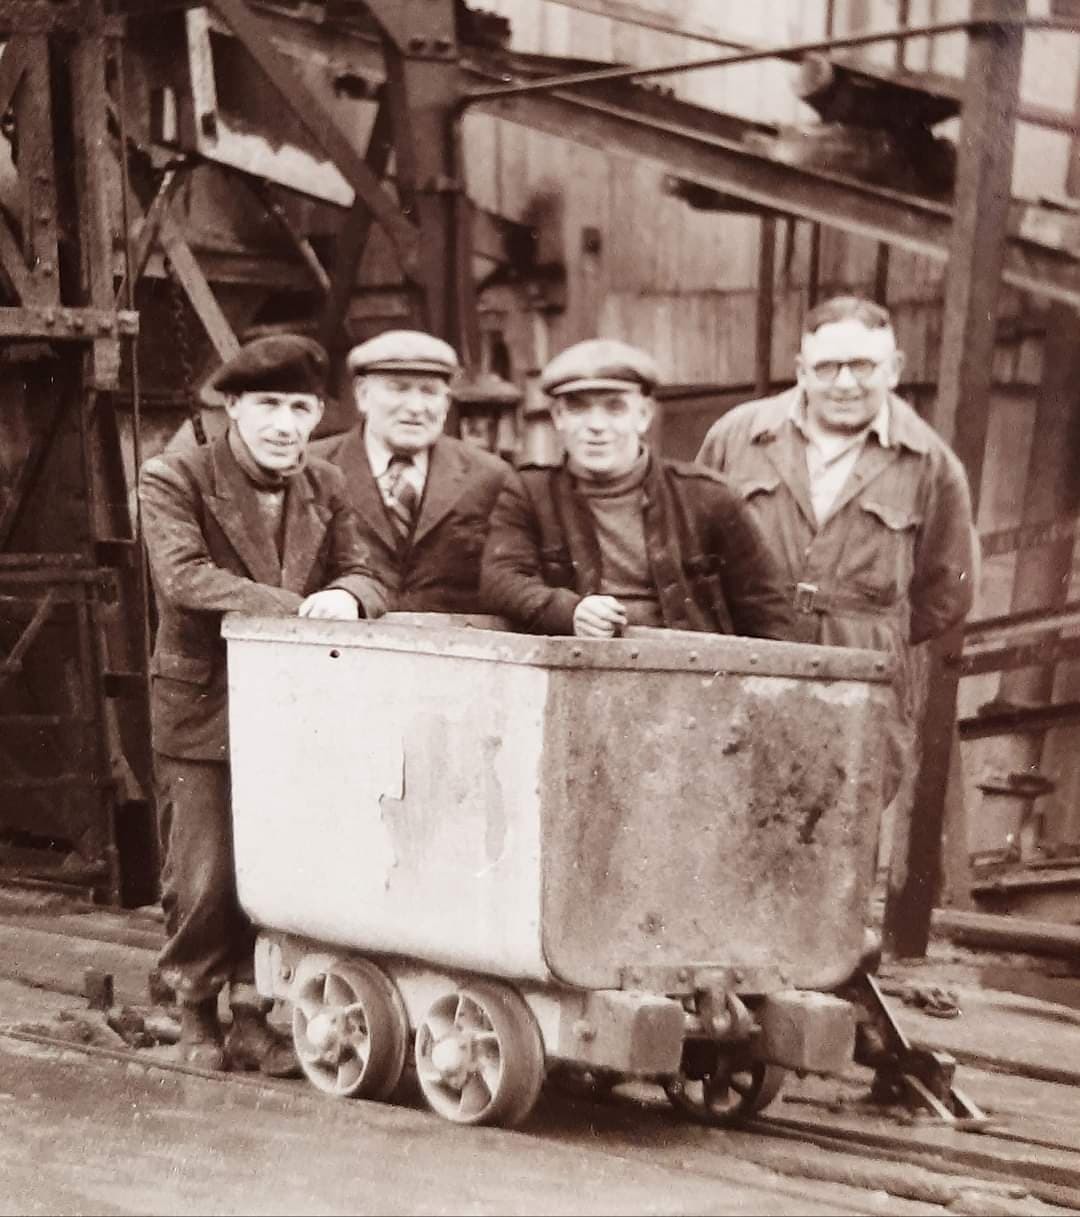 Photo taken in the late 1940s at Pen-y-Bryn shaft top Halkyn. Pictured are Ernie Marshall, Albert Richardson (Rob’s grandad), Evan Jones and Jim Blythin. Photo courtesy of Rob Richardson